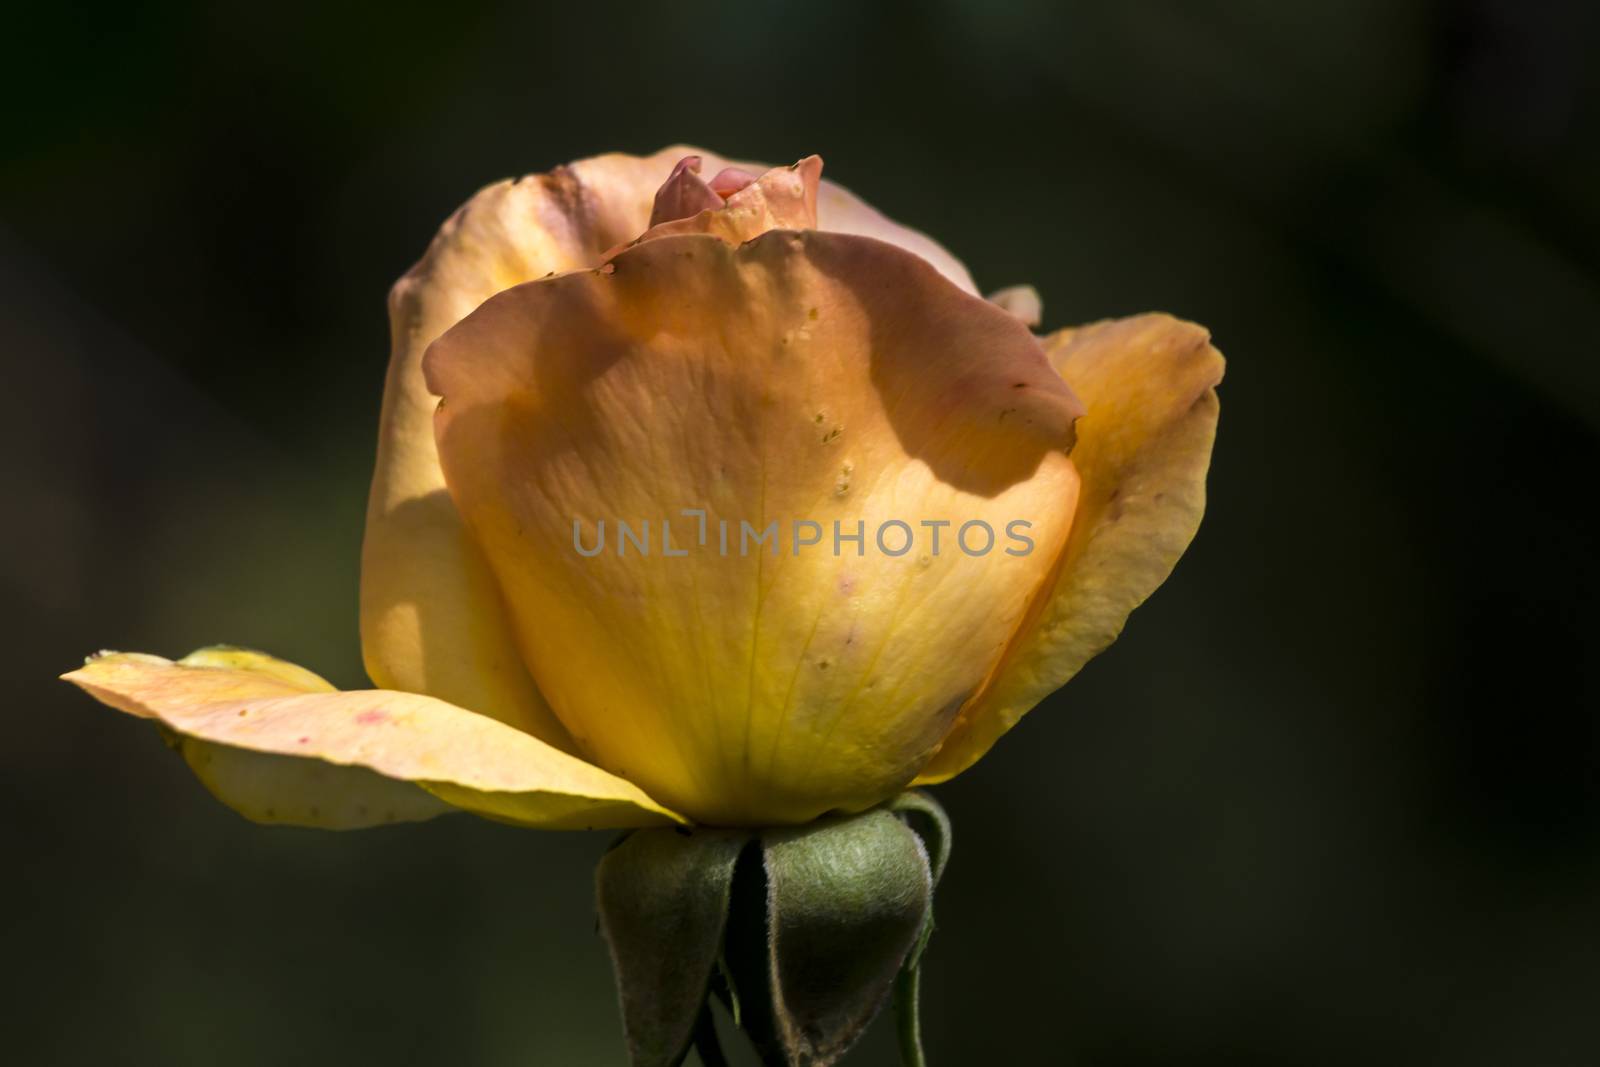 The yellow rose is filled with water droplets.